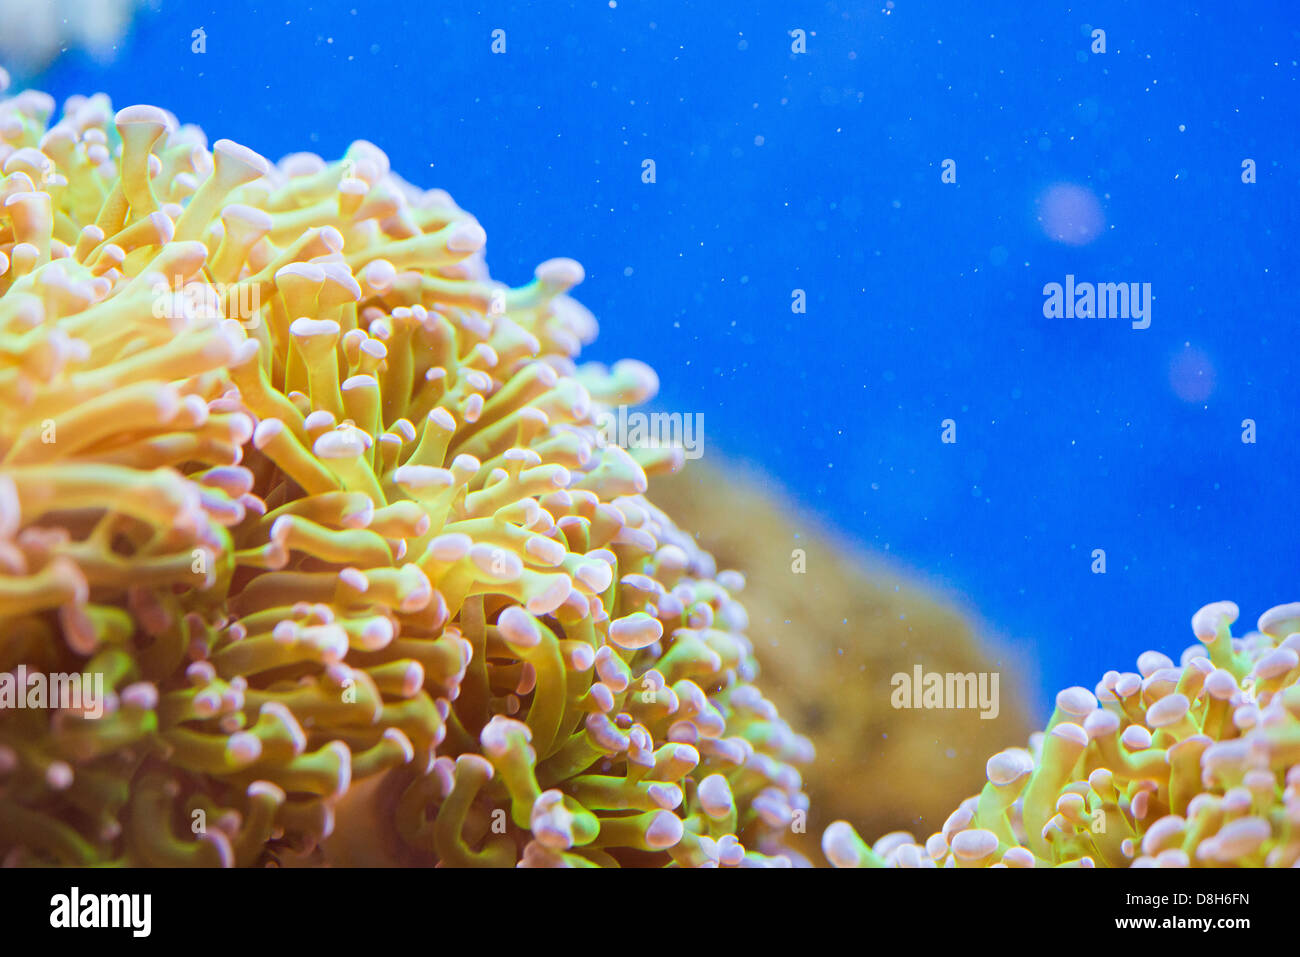 CARYOPHYLLIIDAE - colorful coral sea - detail Stock Photo